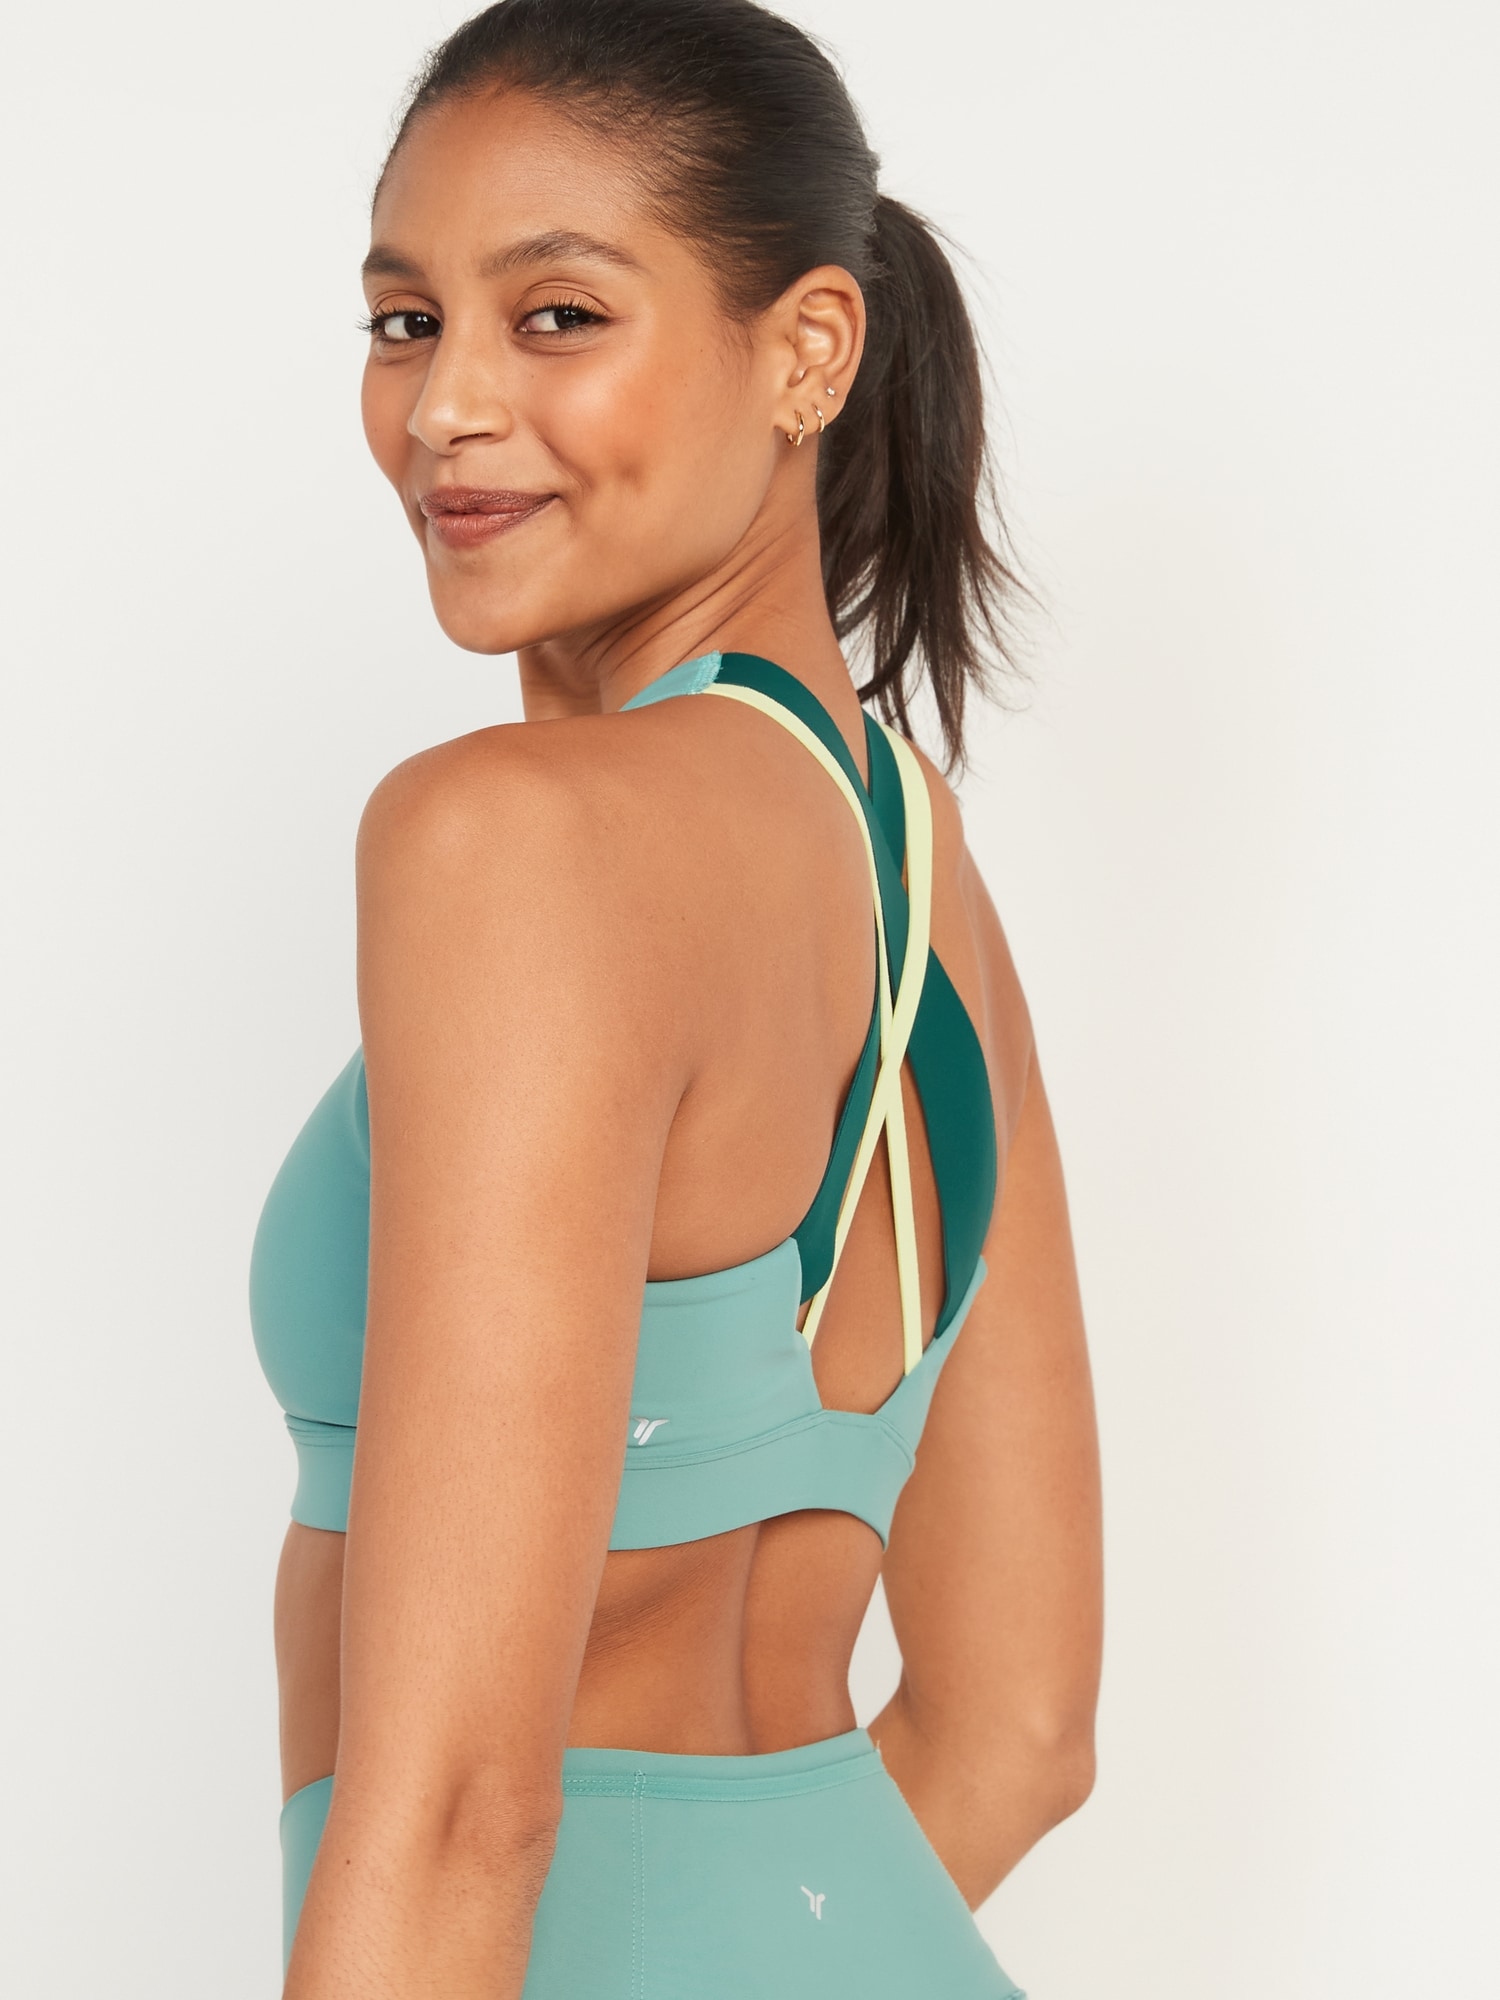 Sports Bra with Criss-cross straps and Back Closure - NYK310- Surf The Web